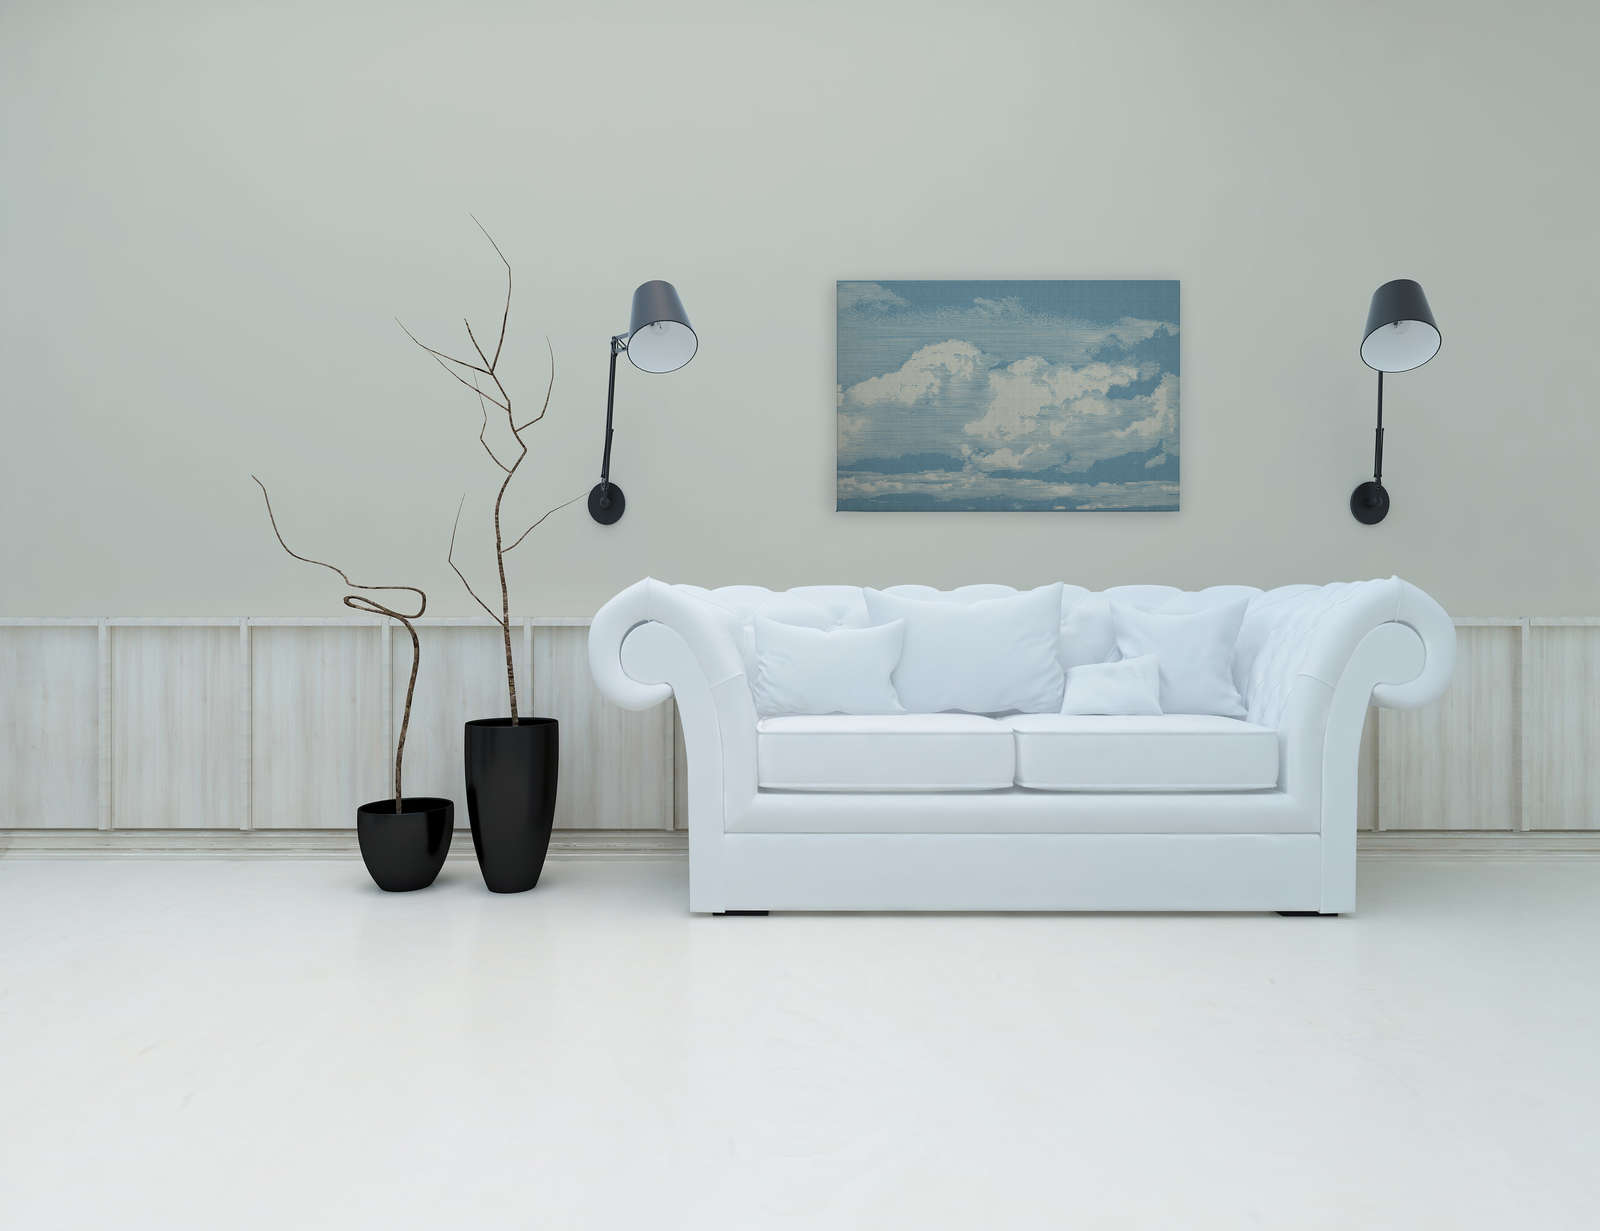             Clouds 1 - Heavenly canvas picture with cloud motif in natural linen look - 0.90 m x 0.60 m
        